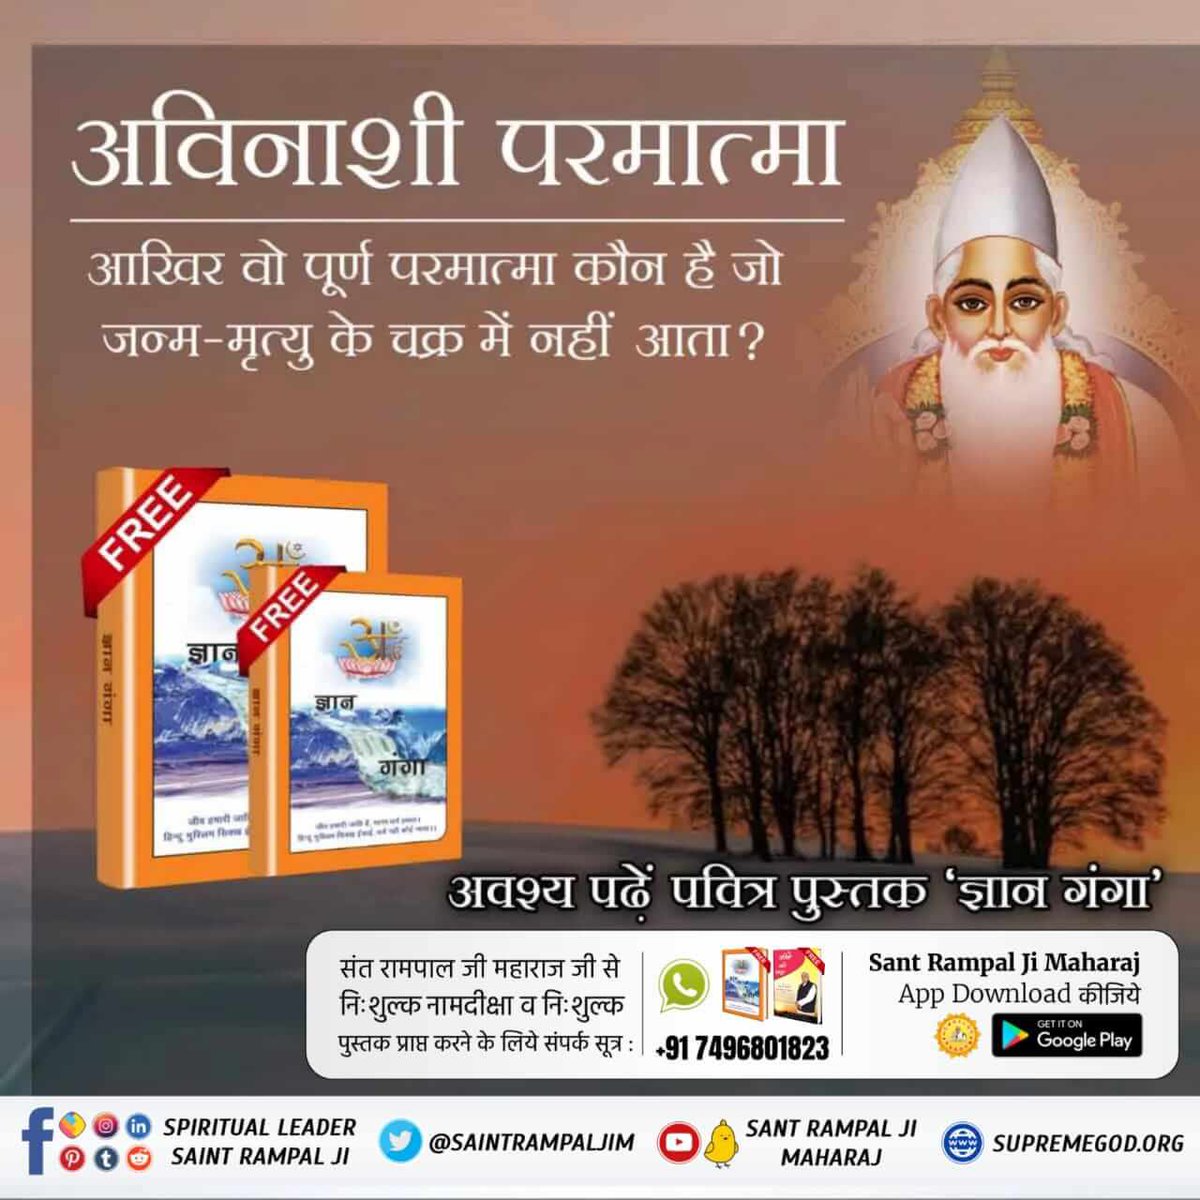 #GodMorningThursday
After all, who is that Purna Parmatma who is not caught in the cycle of birth and death?

To know this, you must read the holy book 'Gyan Ganga'
Must
Watch Sadhna Channel at 7:30 PM
#thursdaymorning